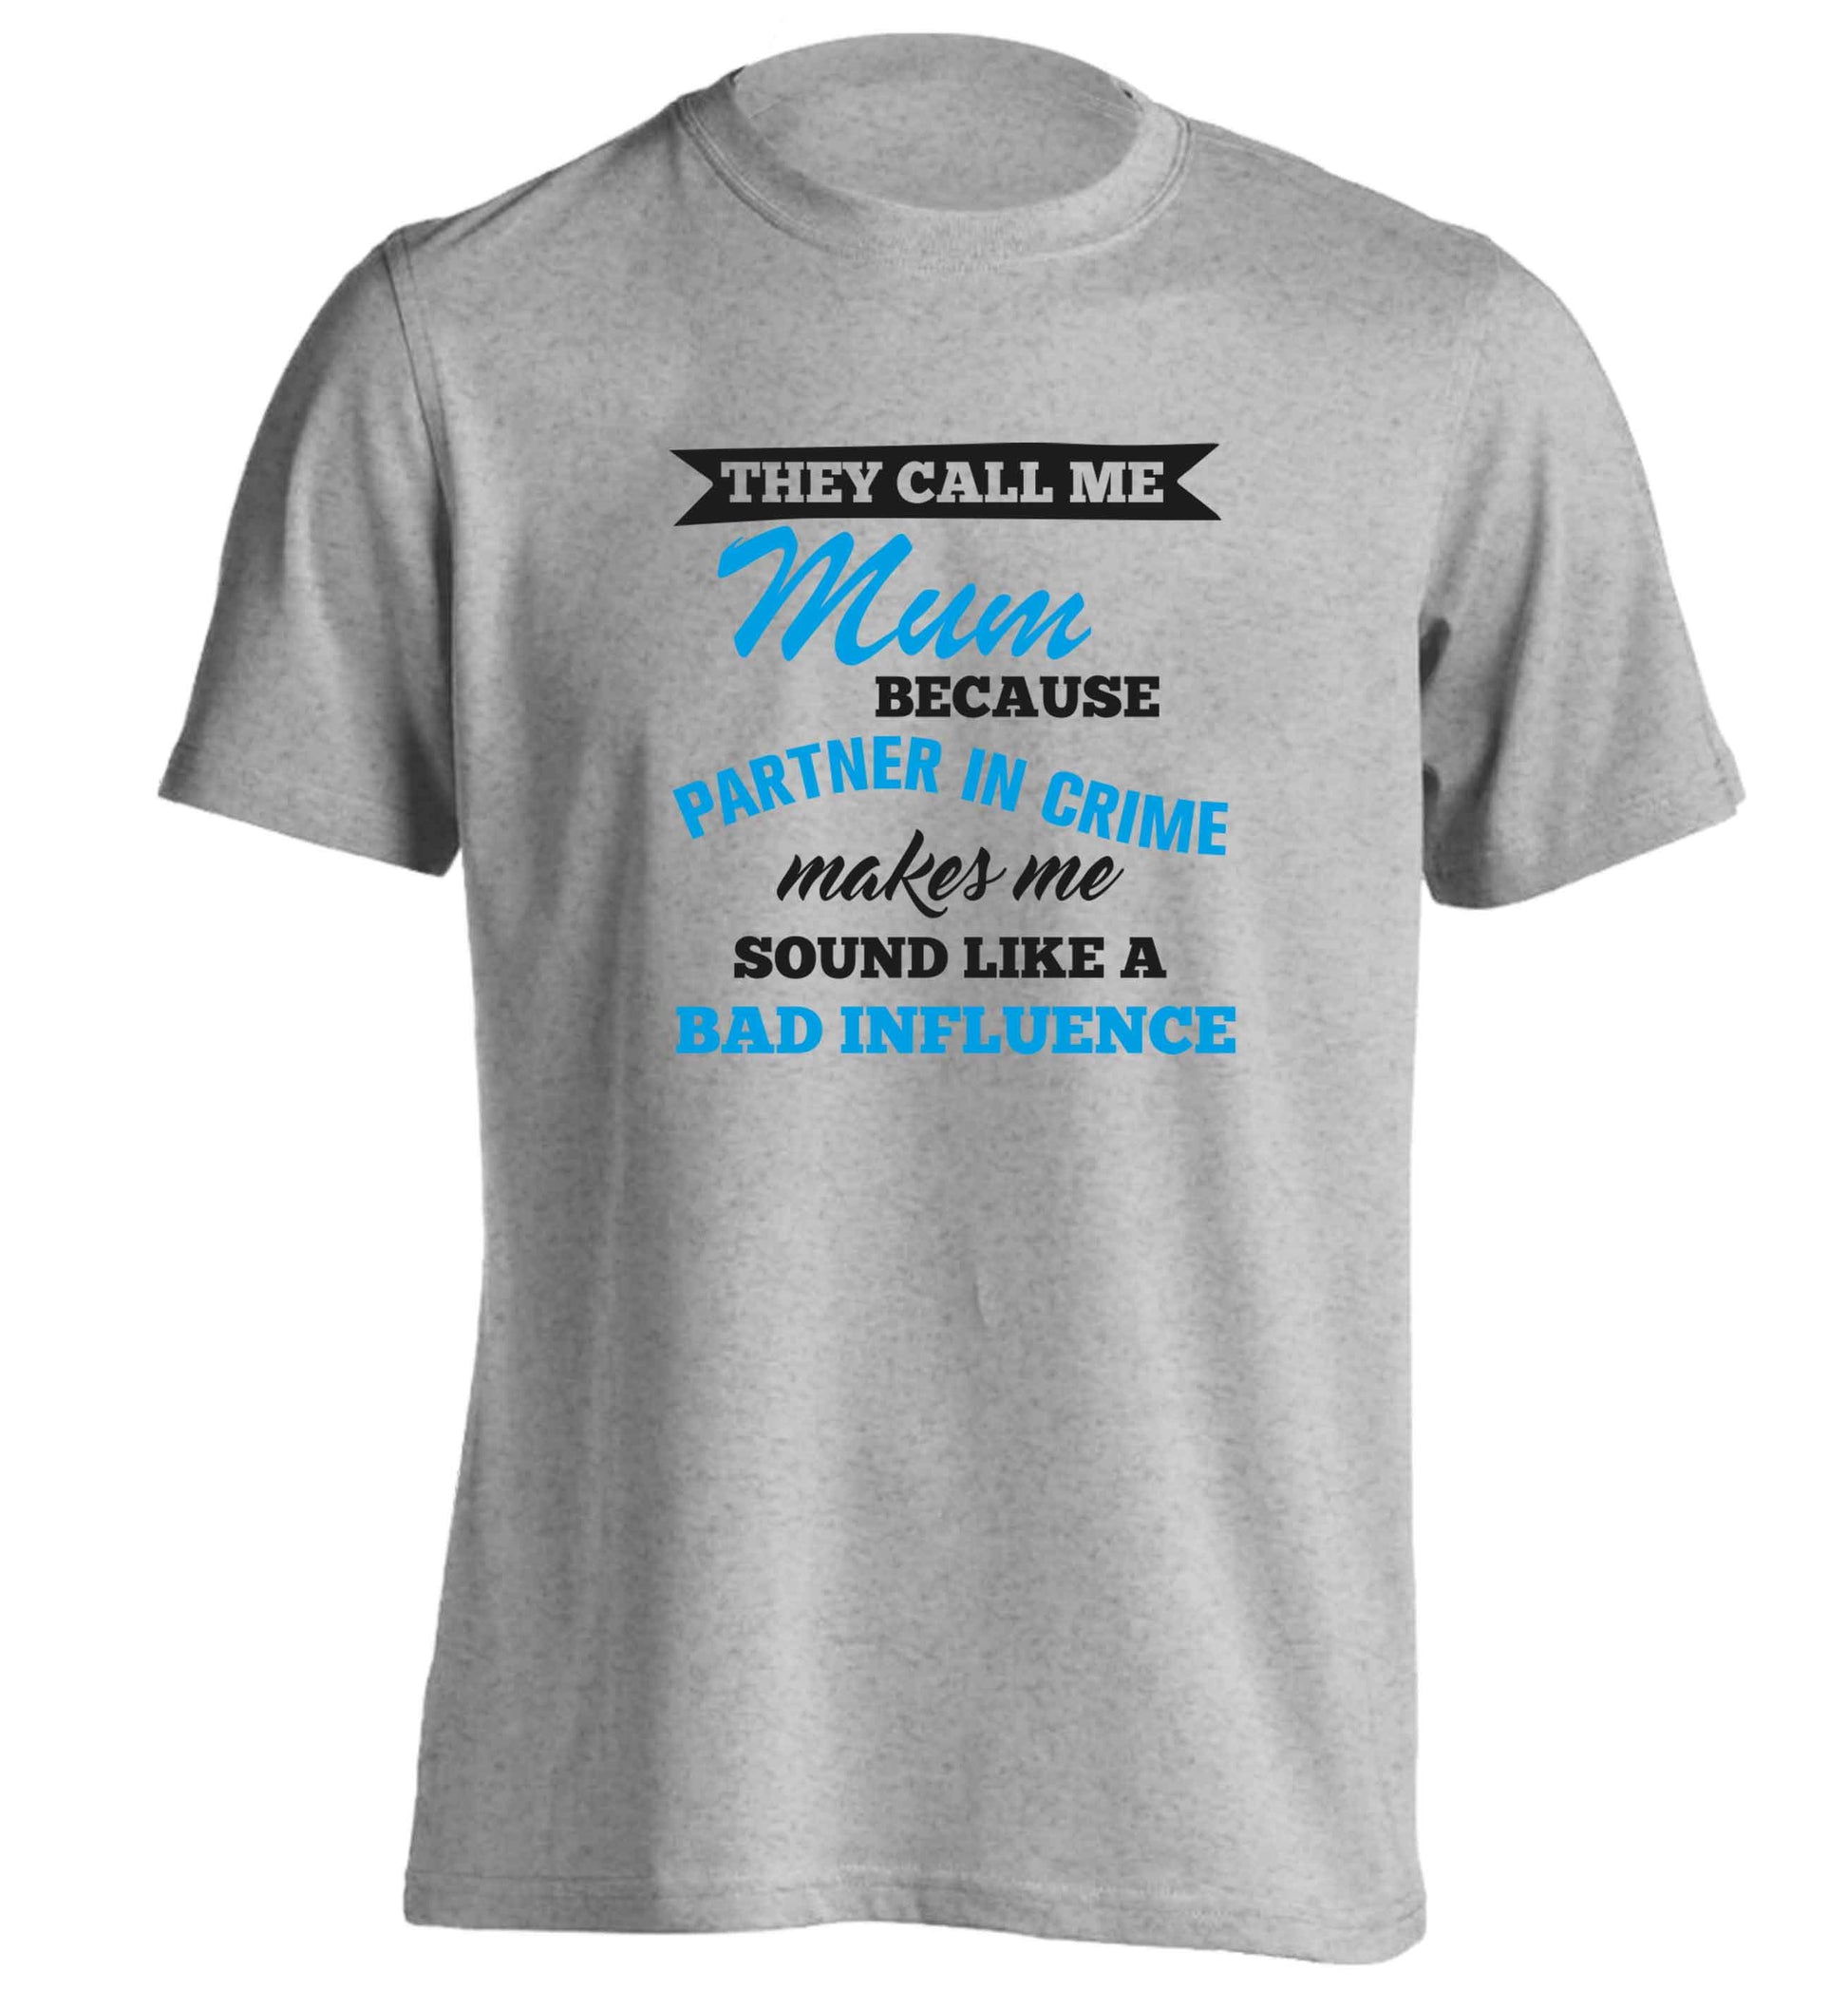 They call me mum because partner in crime makes me sound like a bad influence adults unisex grey Tshirt 2XL